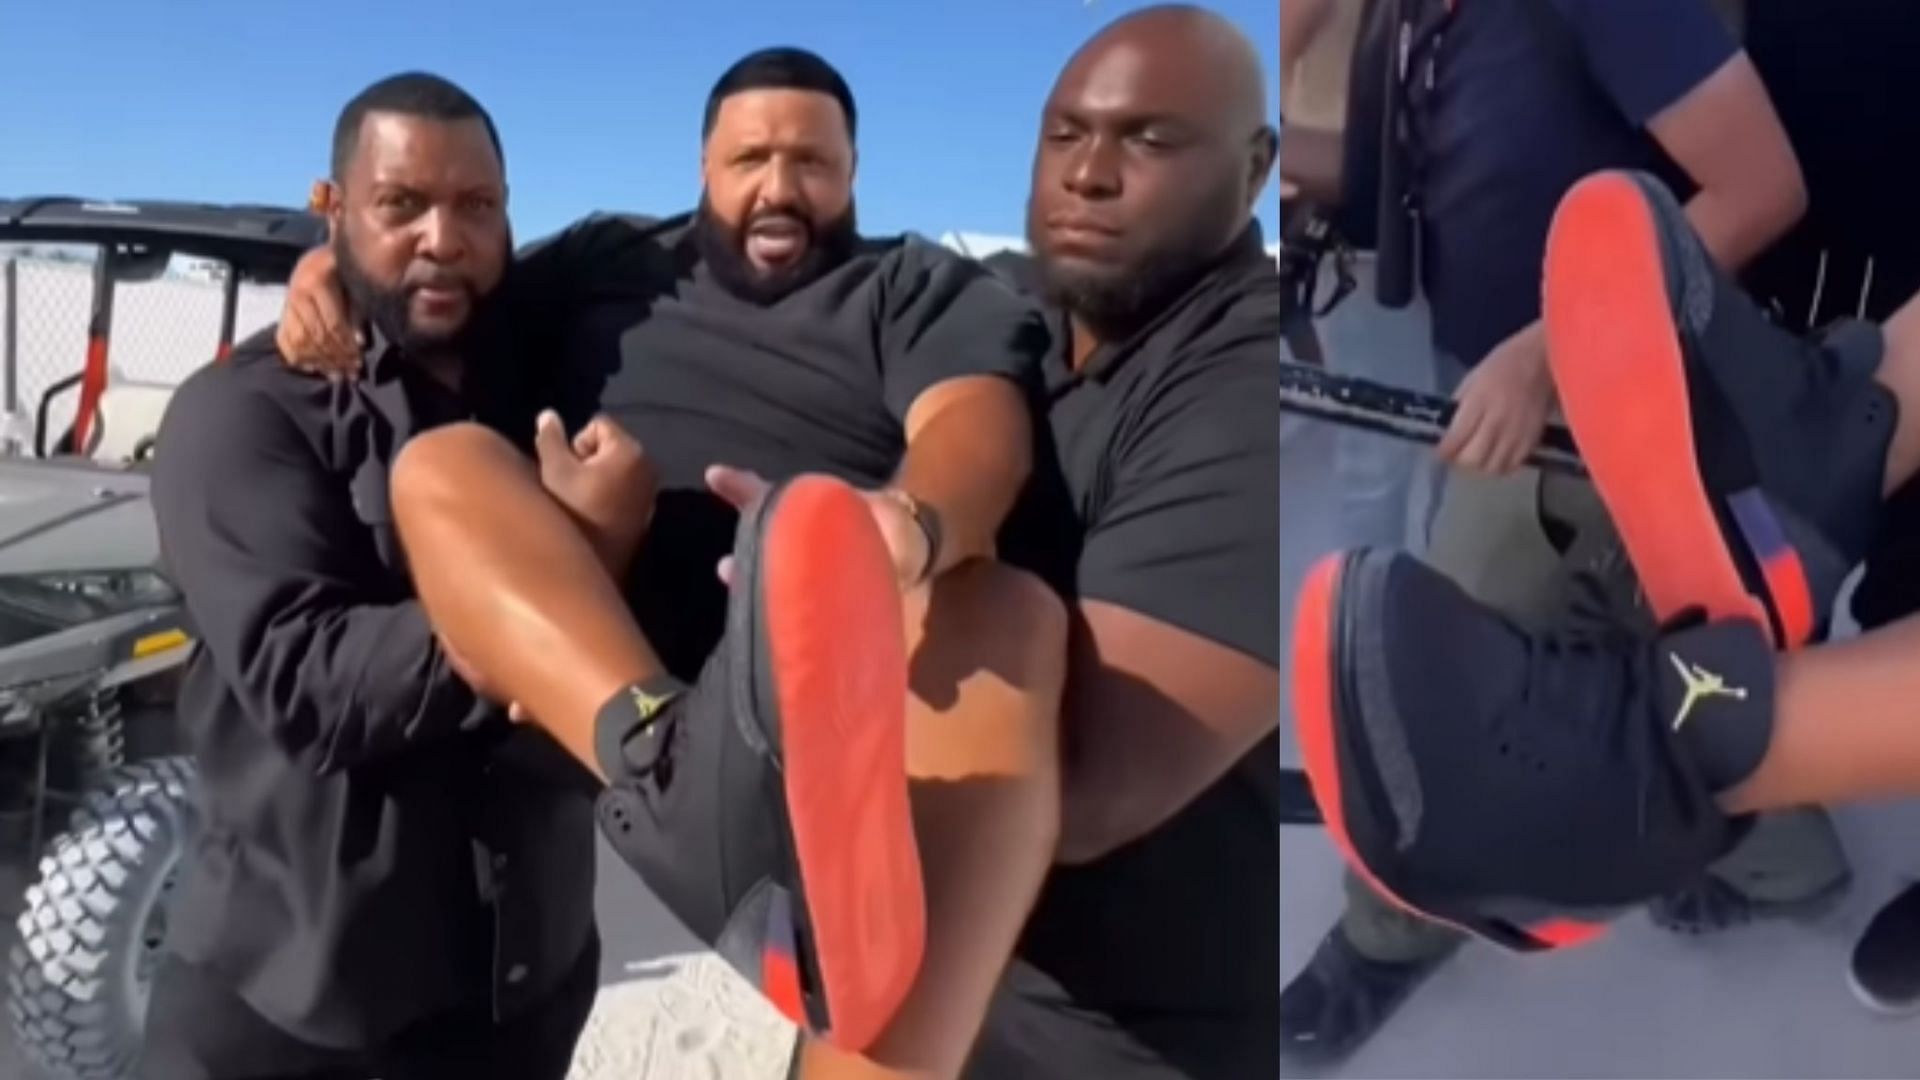 DJ Khaled enlists the help of two security guards to transport him as he was wearing new Air Jordans